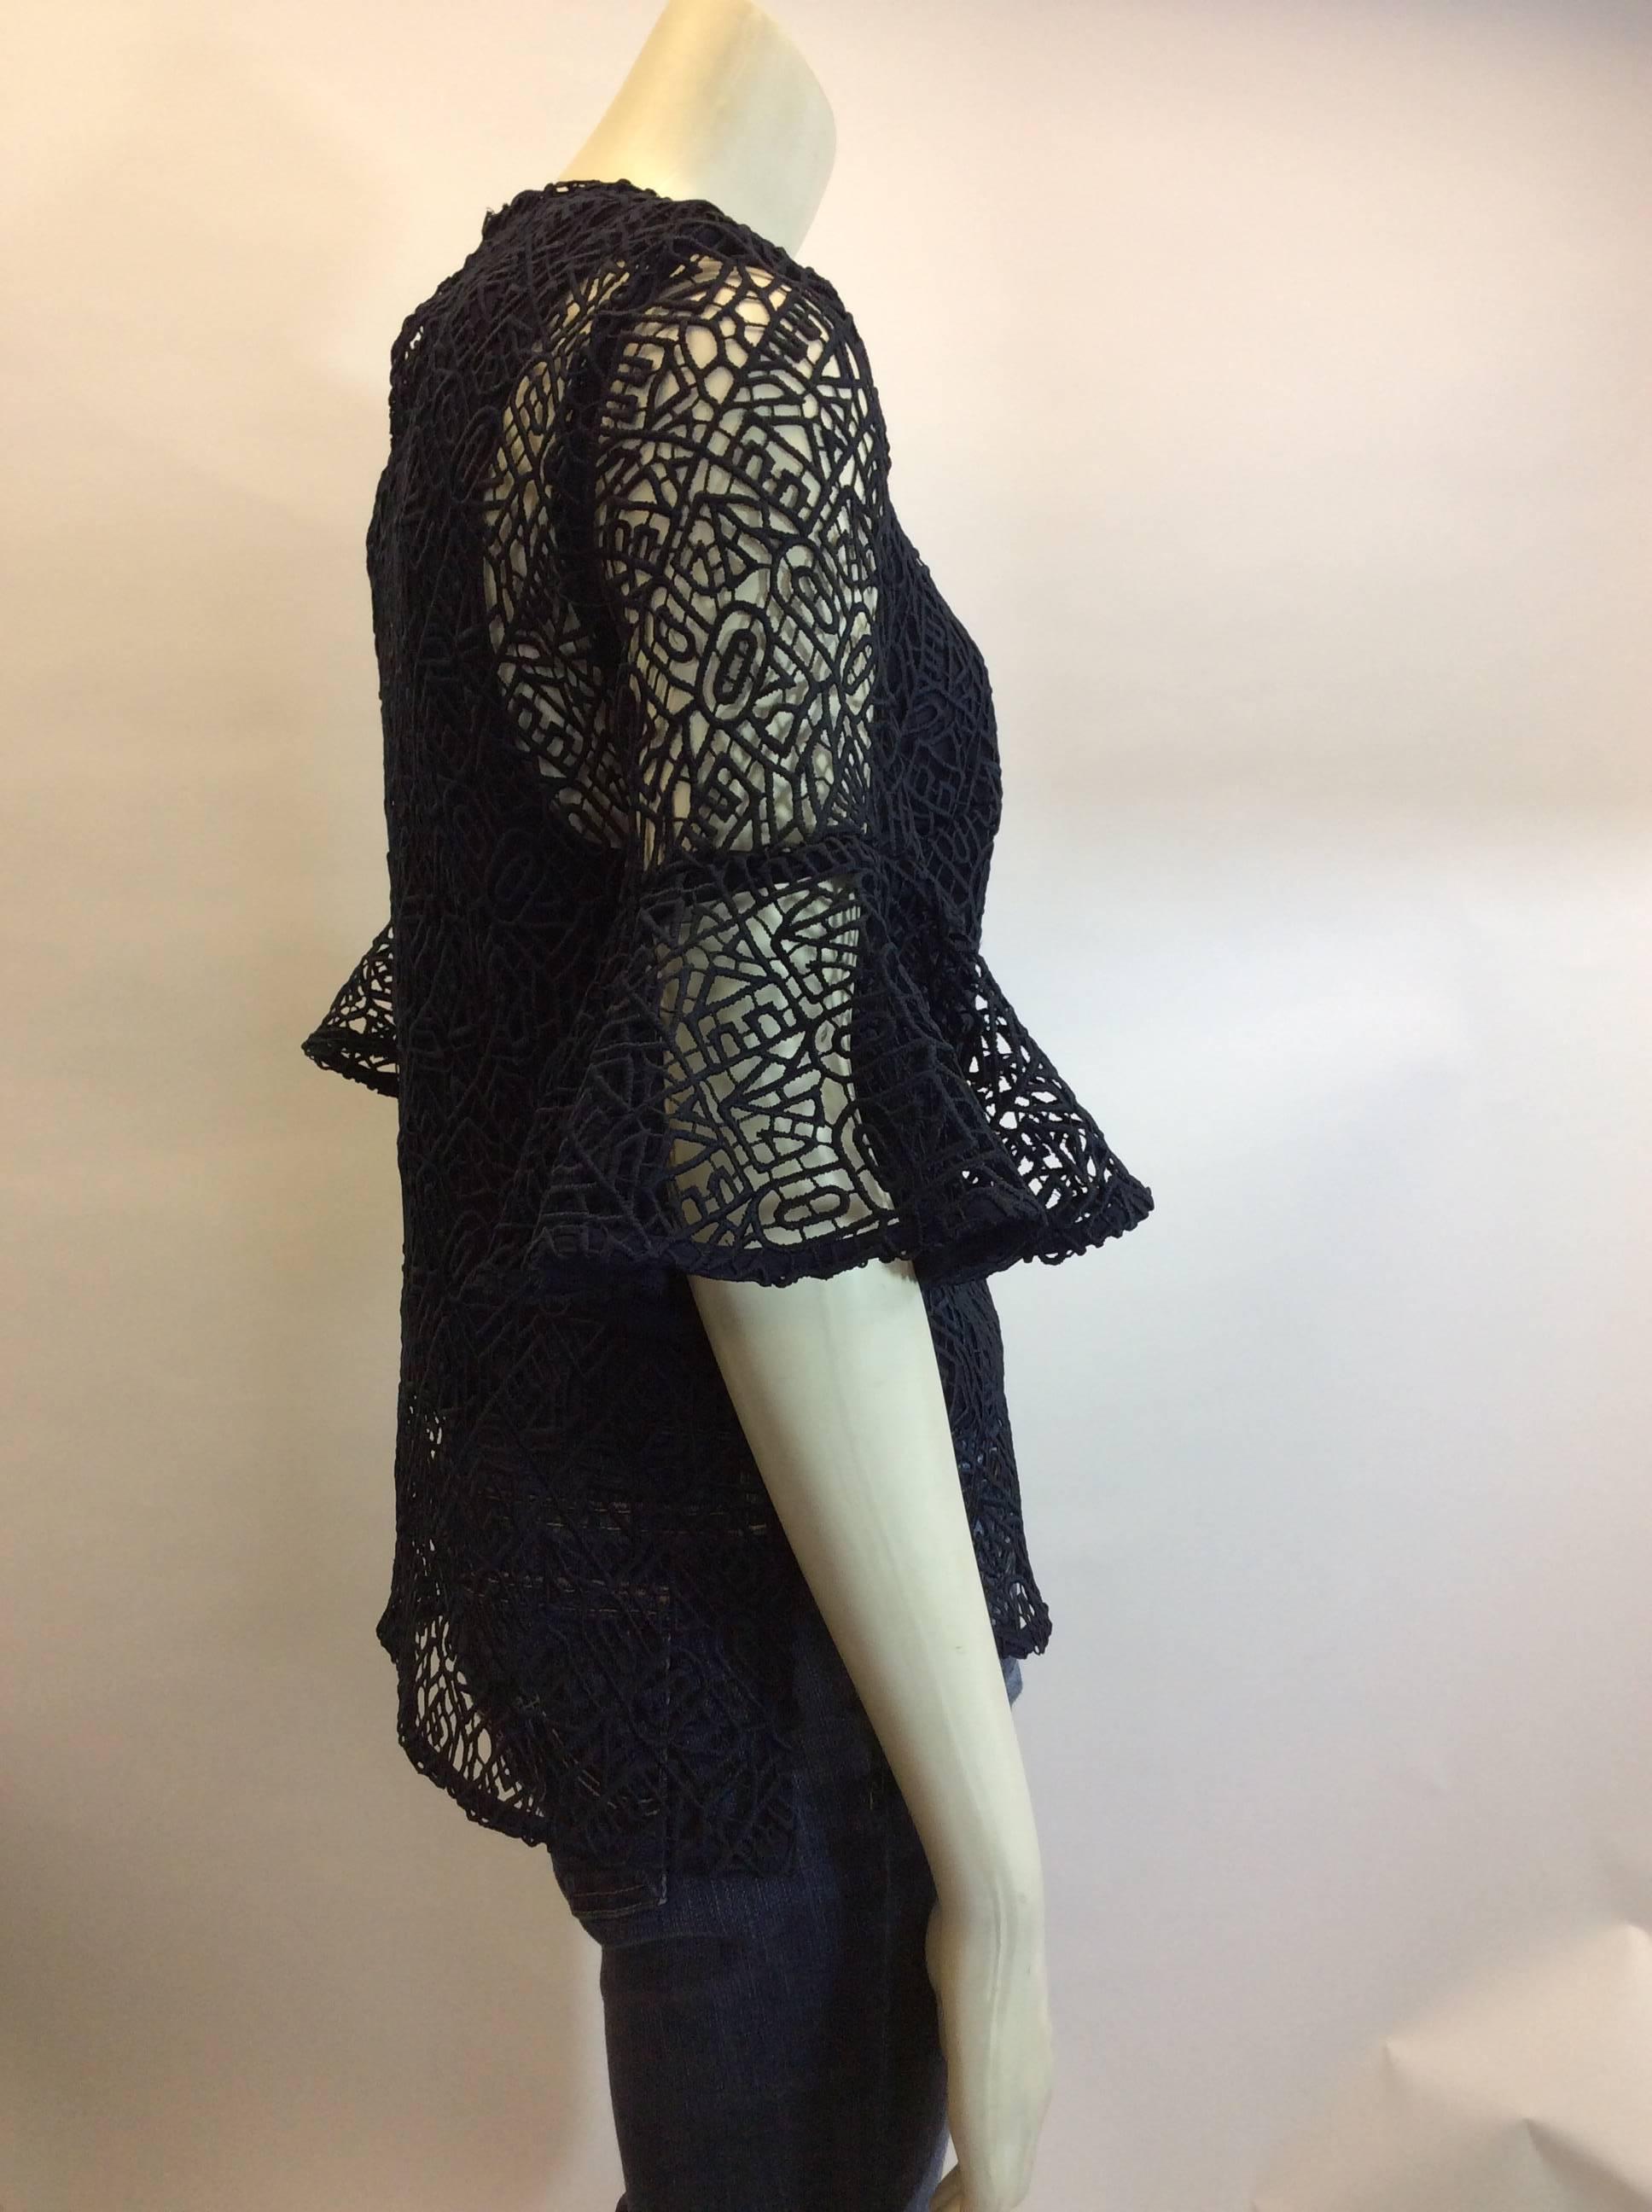 Prose & Poetry NWT High Low Lace Navy Top
Size Medium
NWT Original Price: $328
Bell sleeve
$199
Made in USA